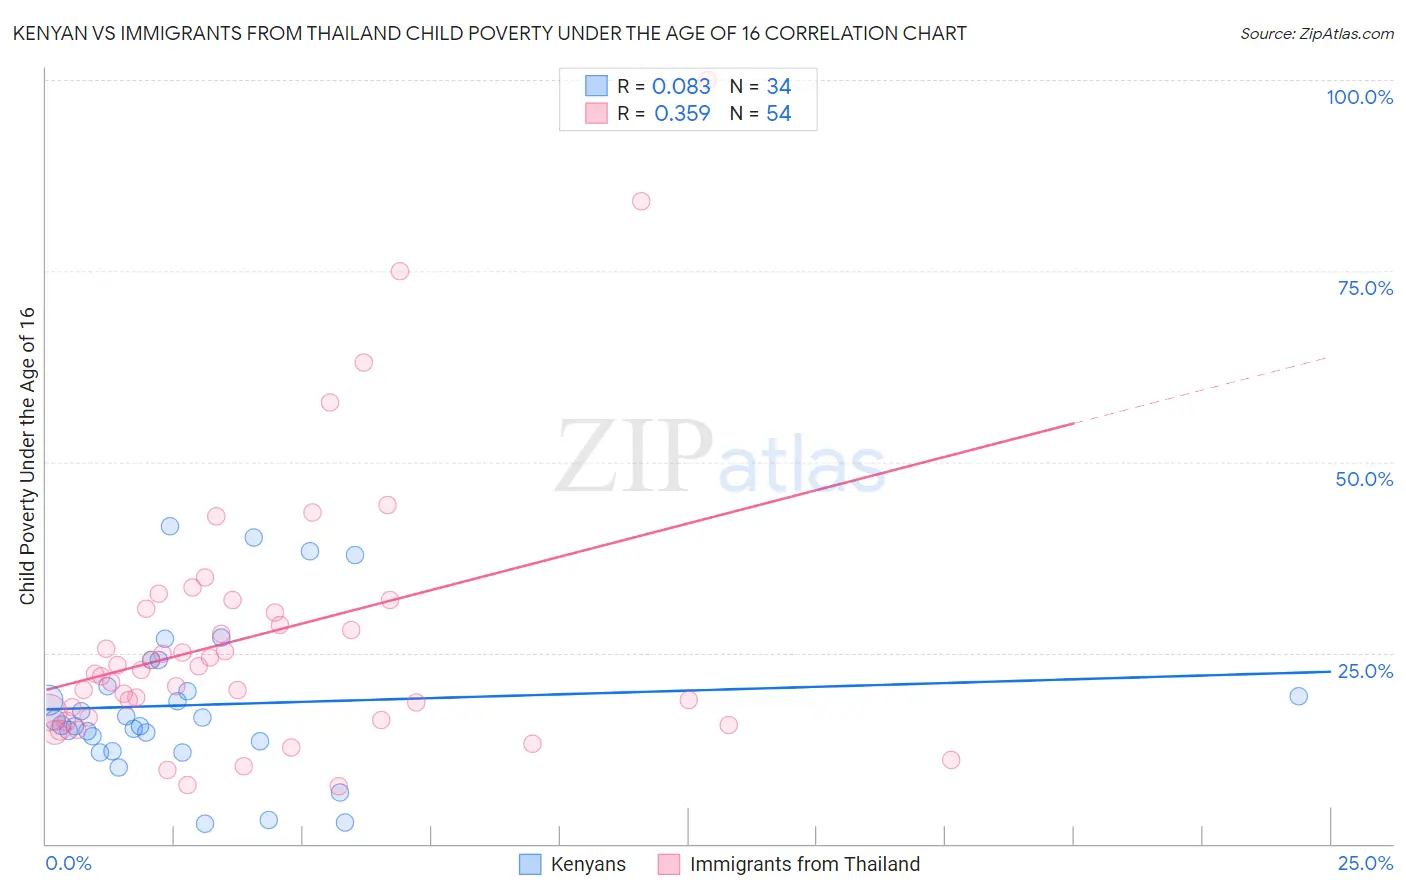 Kenyan vs Immigrants from Thailand Child Poverty Under the Age of 16